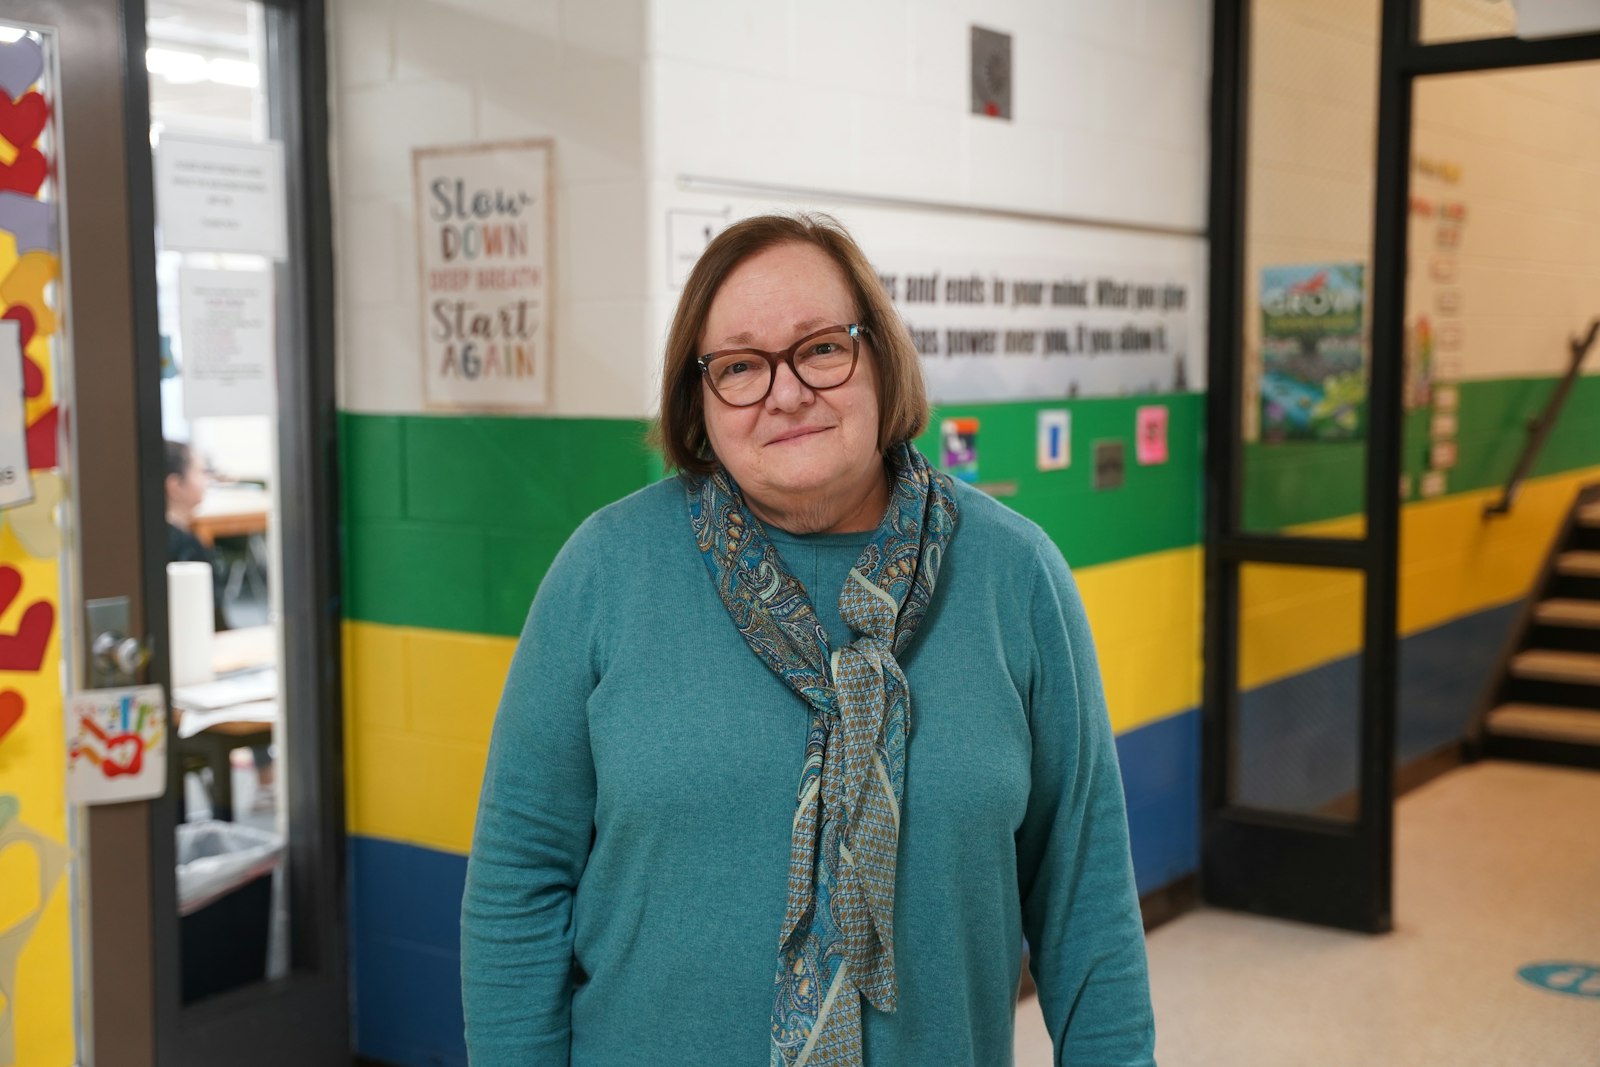 “Seeing the kids succeed, going from a non-reader to reading above grade level, that’s the best part of my job,” Brish said.